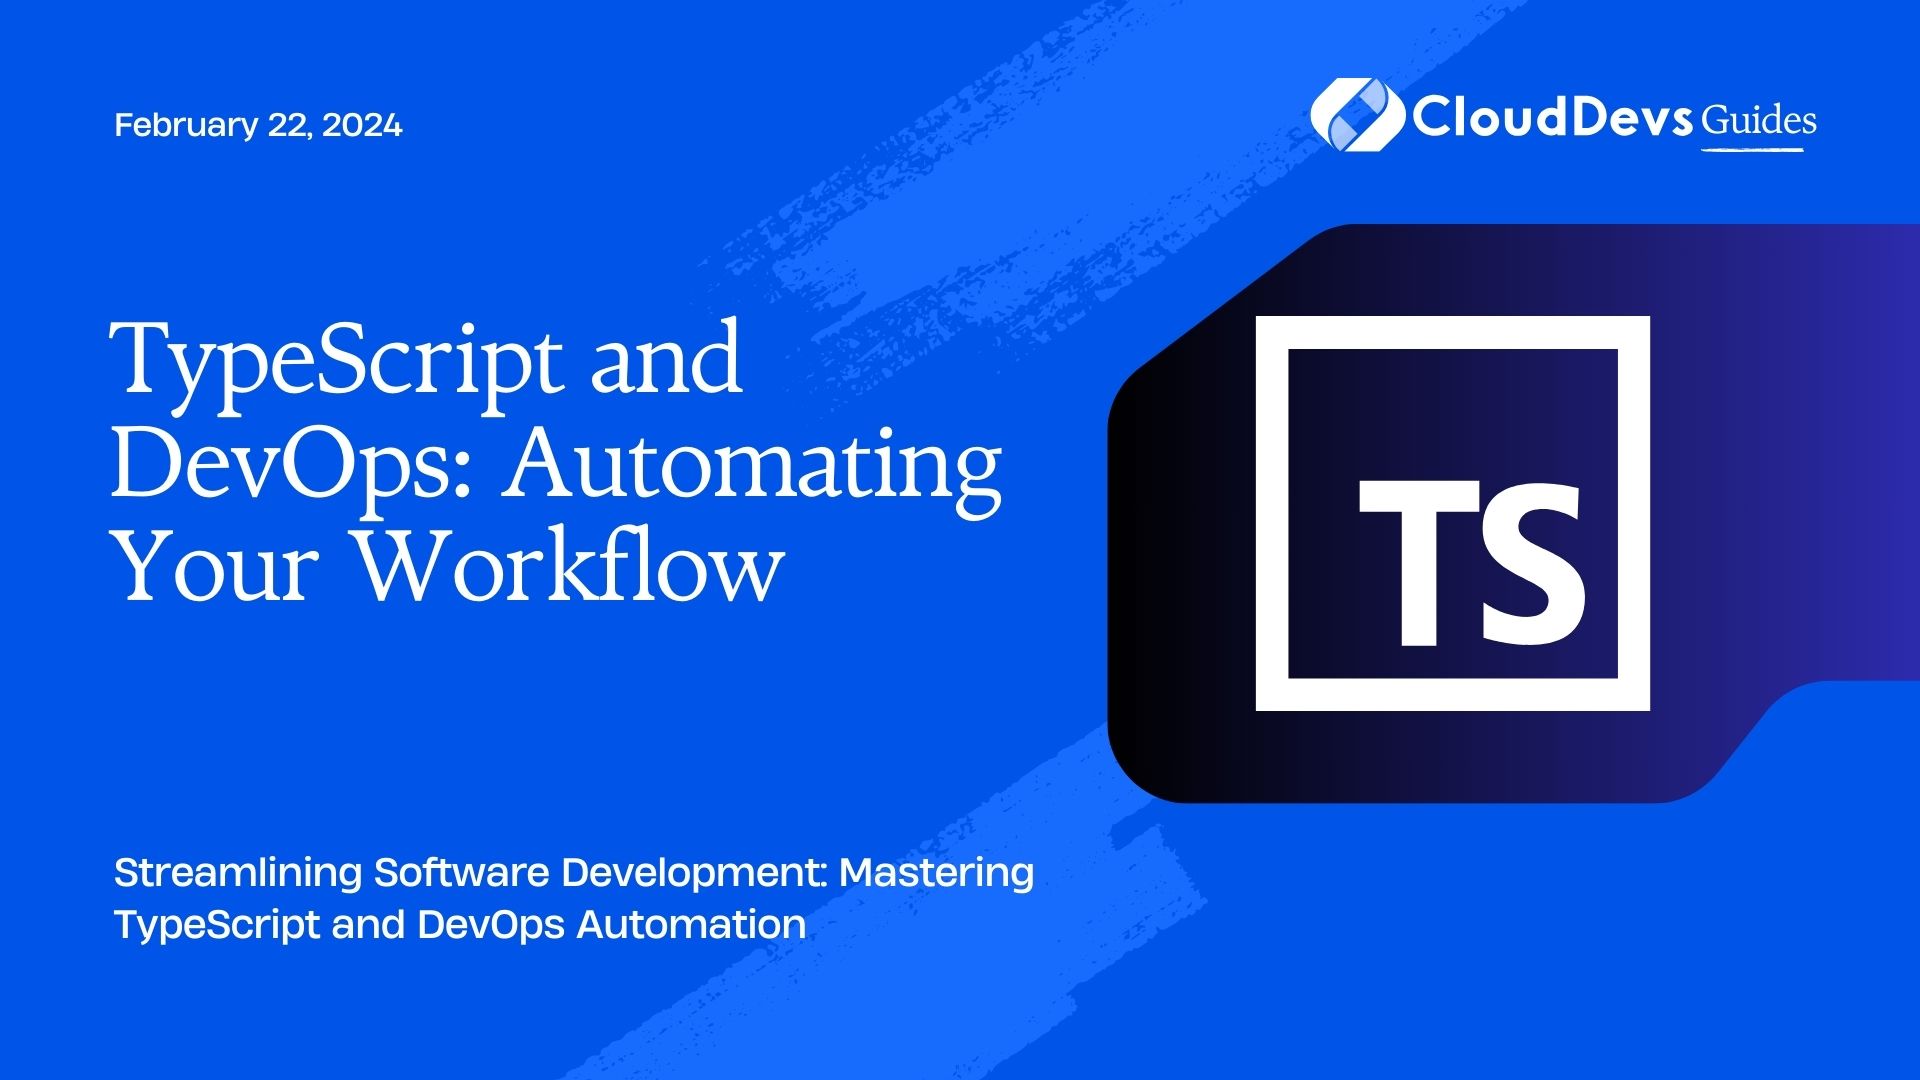 TypeScript and DevOps: Automating Your Workflow